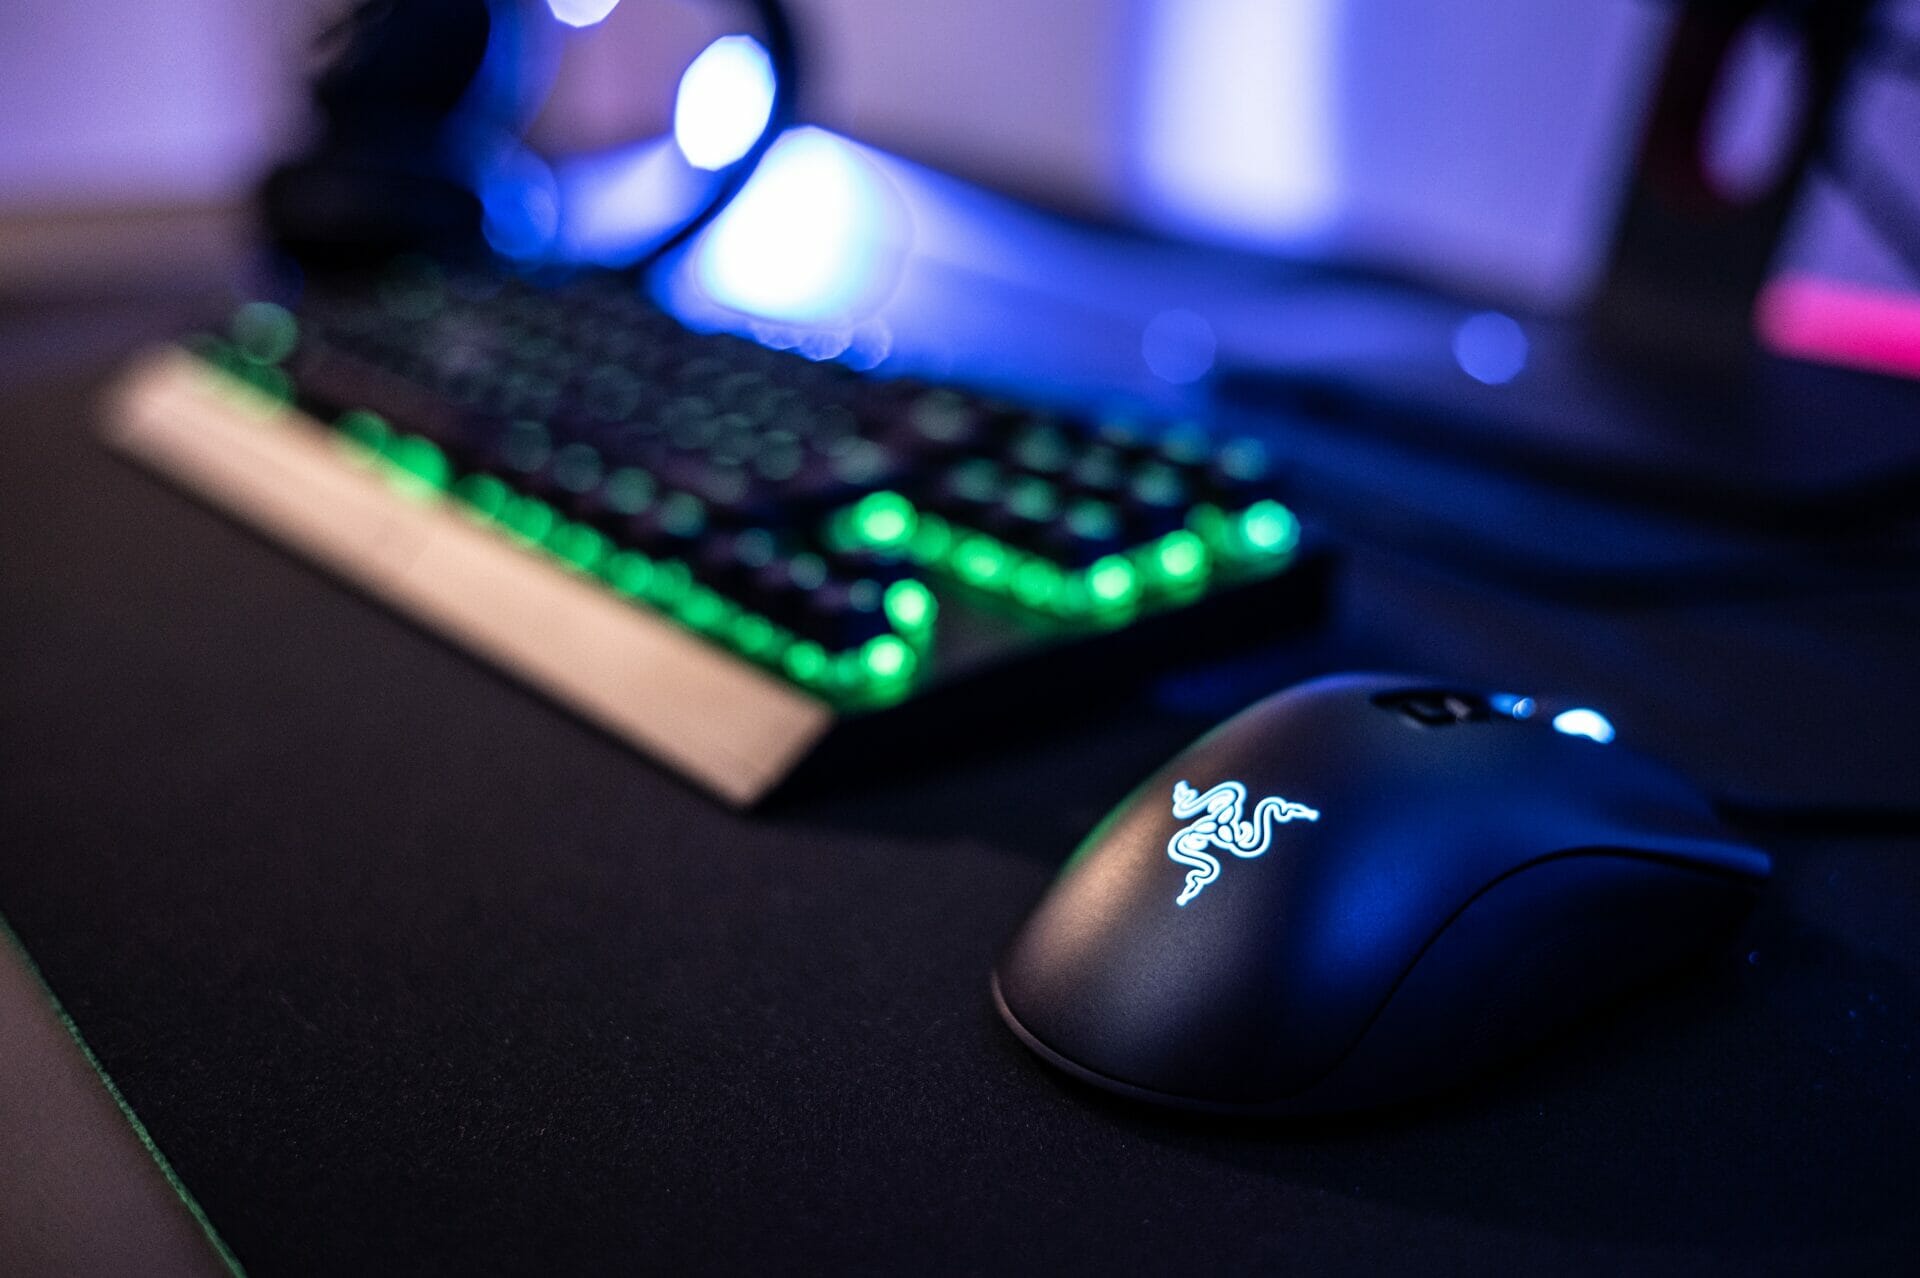 How to turn on razer keyboard lights without synapse